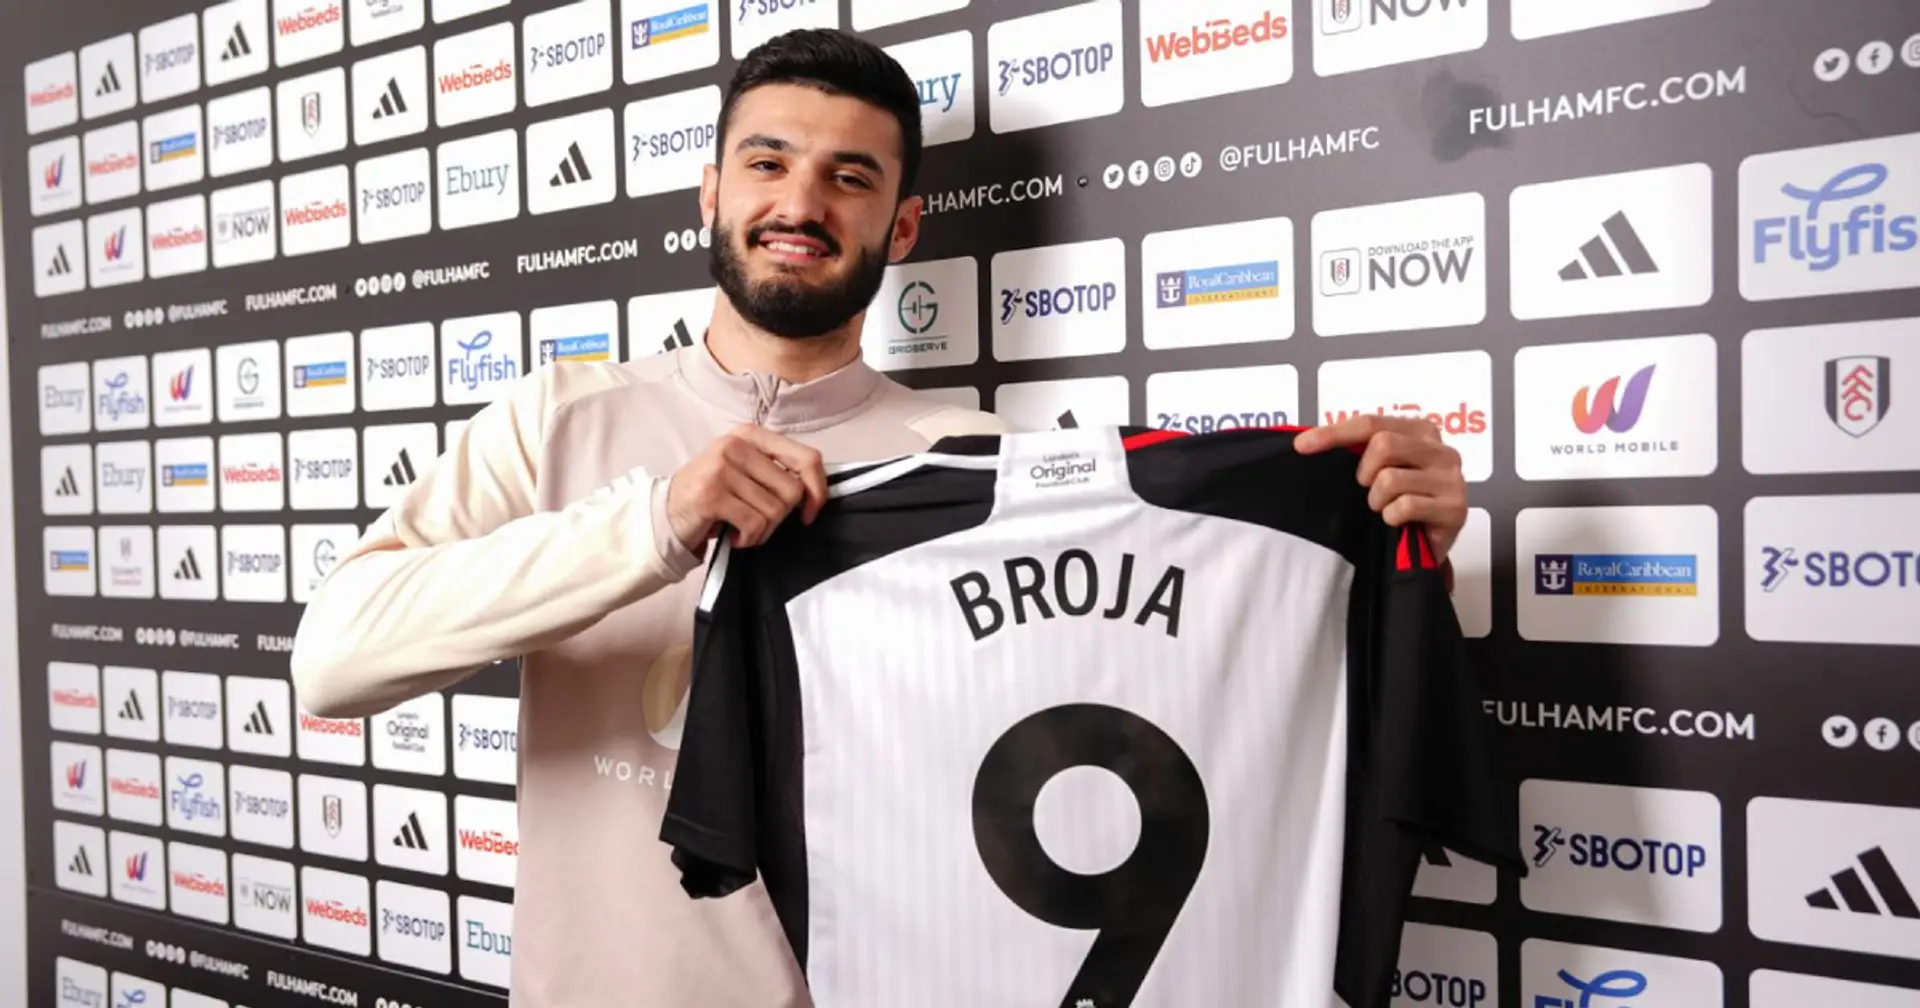 Chelsea to get £4m from Fulham in Broja deal & 2 other big stories you could've missed 